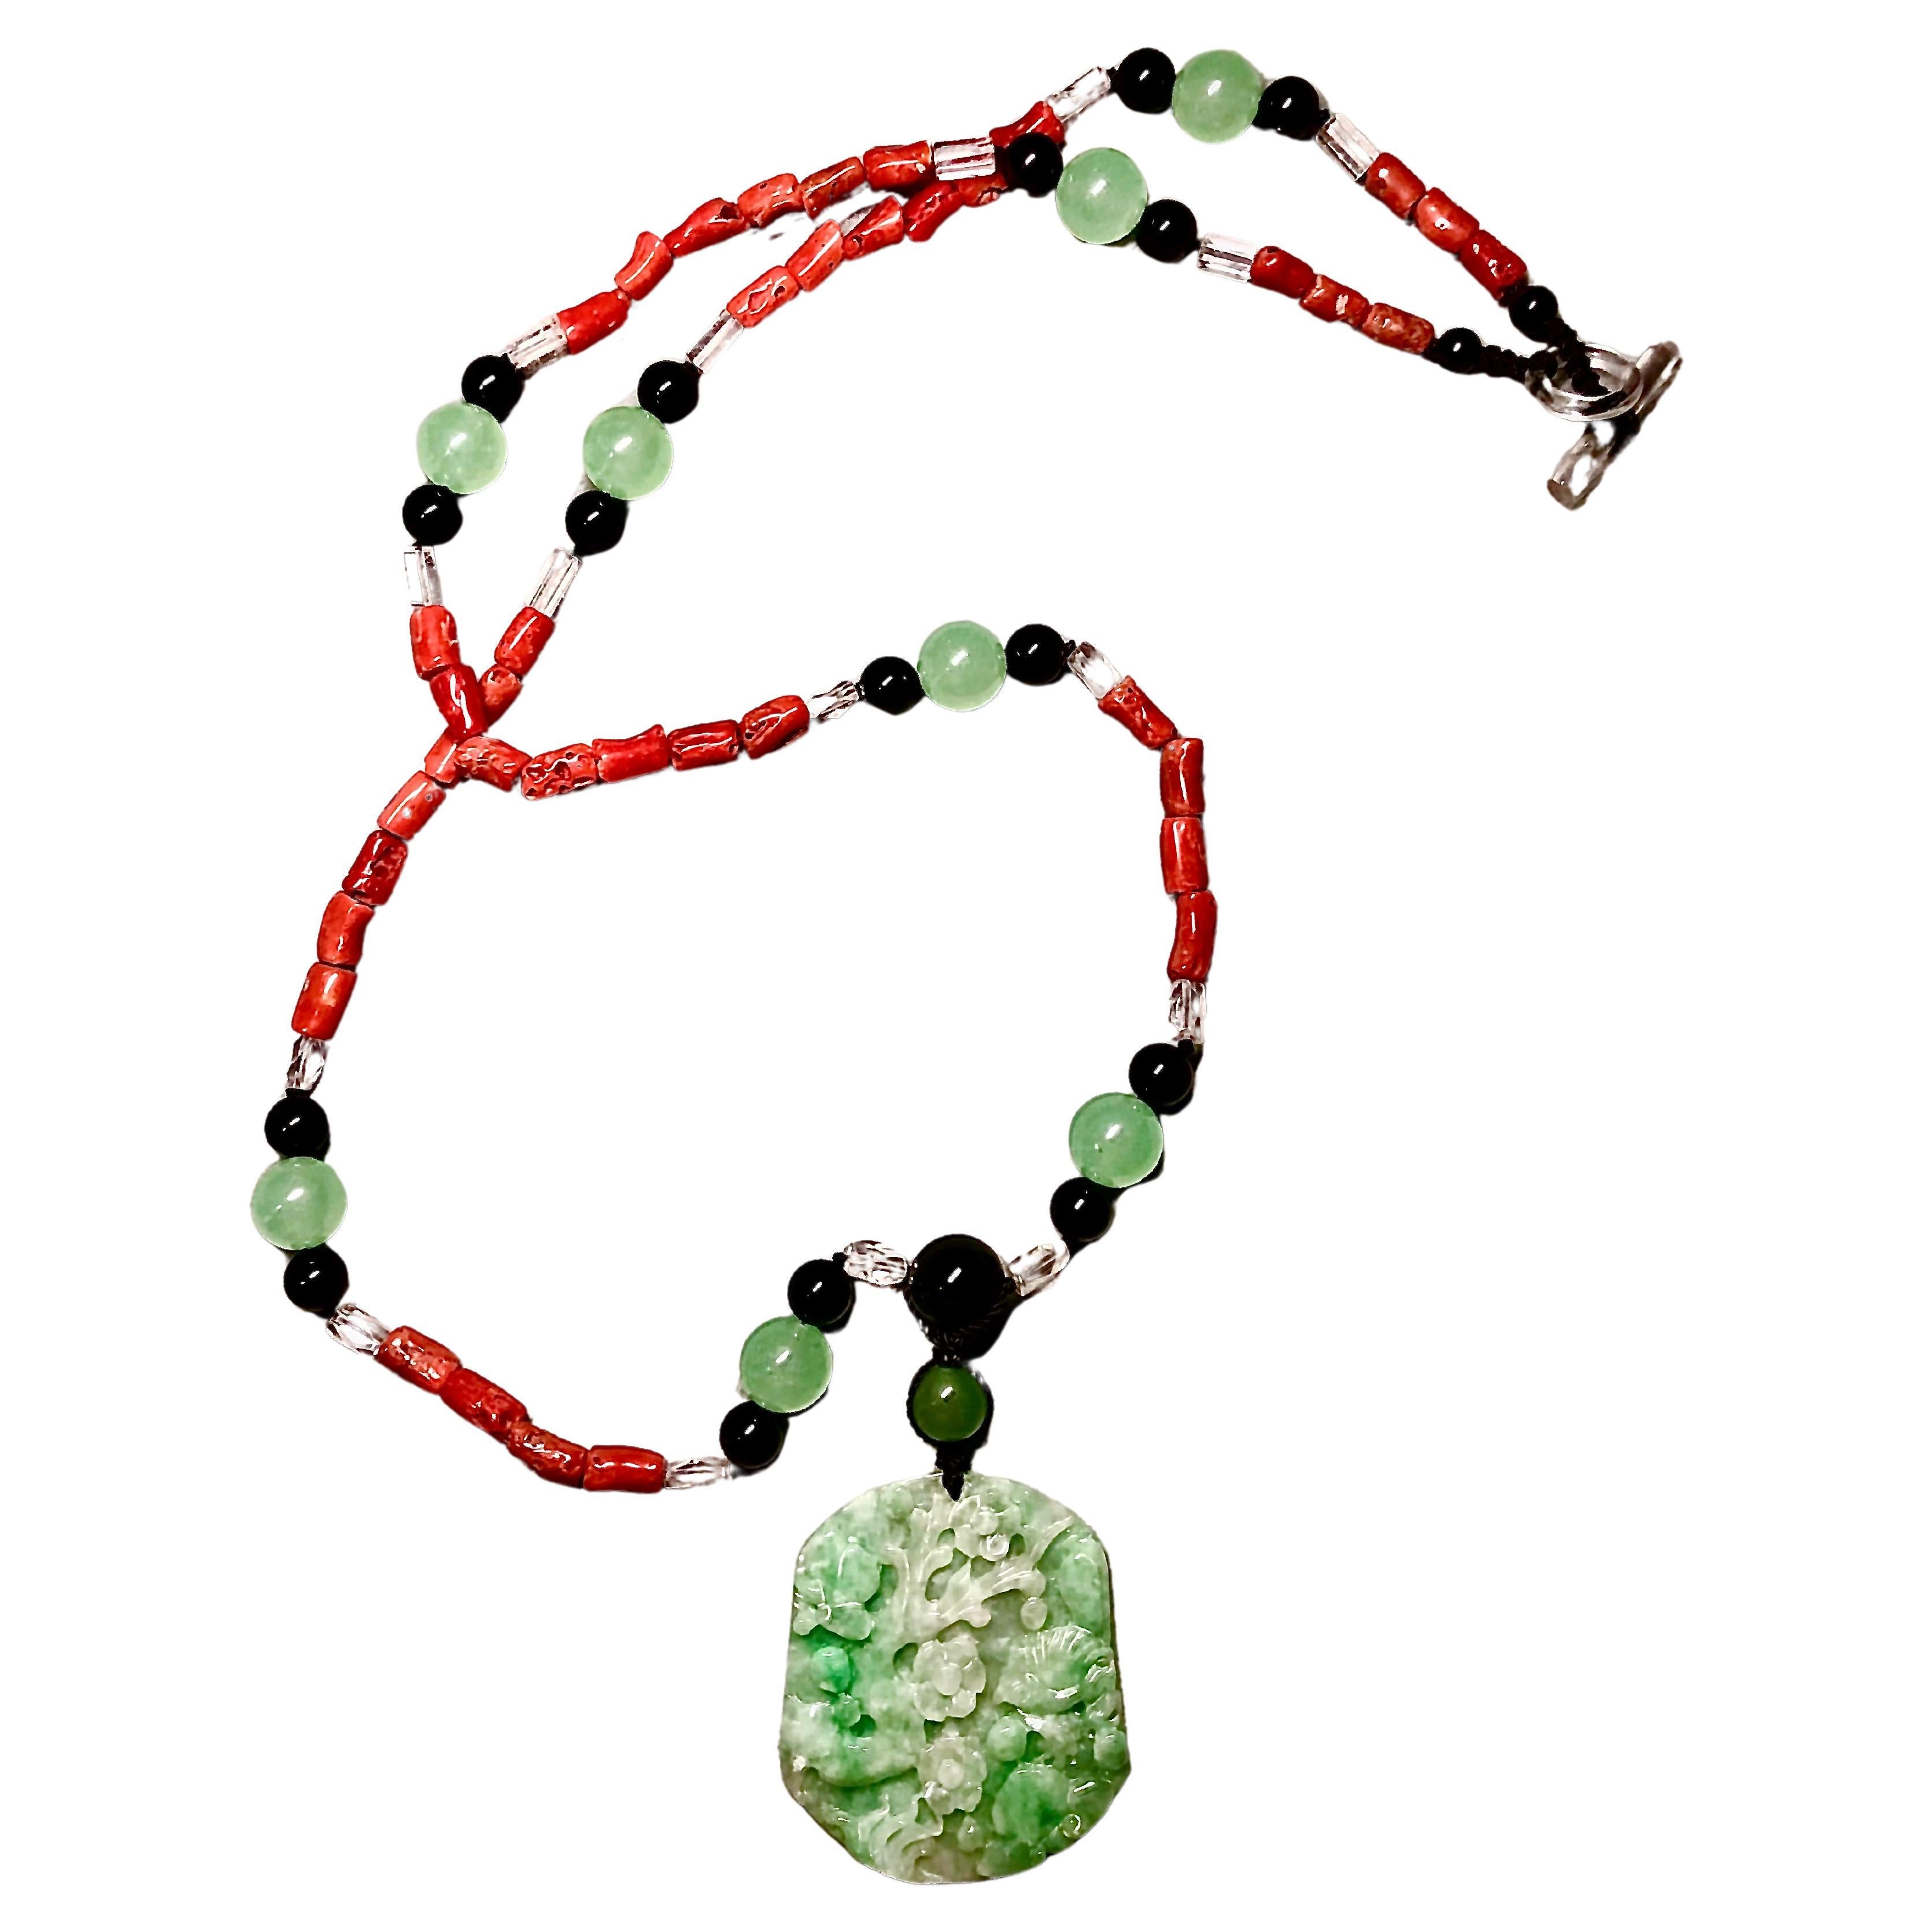 Striking combination of natural red Sardinian coral with stations of luminous green jade round beads flanked with round black onyx beads and faceted tubes of rock crystal. Suspended from the beads is a green mottled jade well carved plaque. The